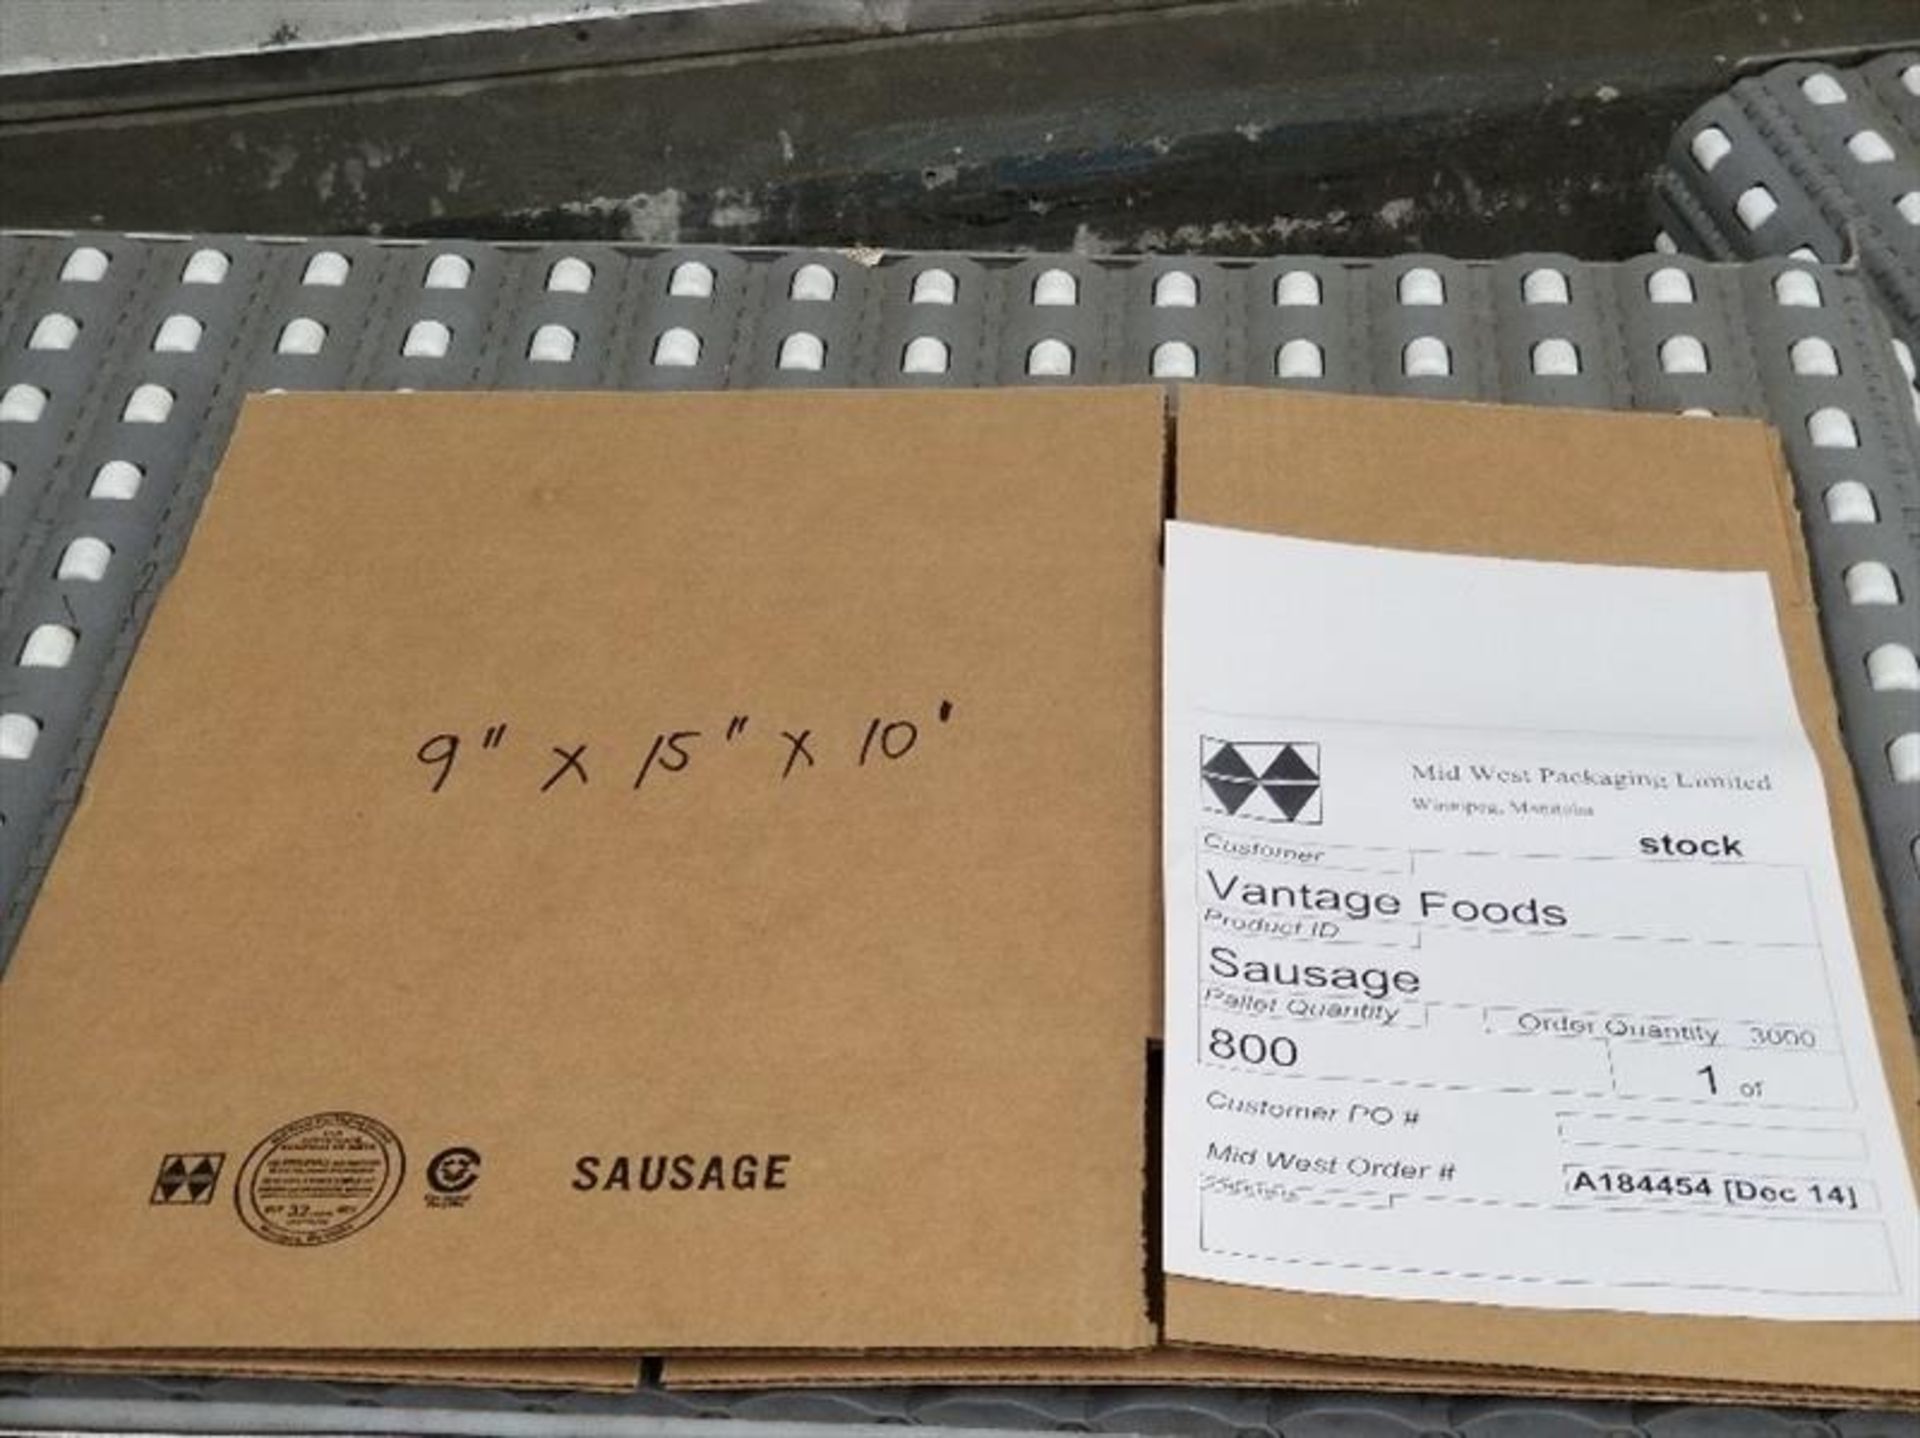 (4 pallets, 3950) A184454 - boxes, Midwest, "Sausage" print, 9 x 15 x 10 - Image 2 of 3